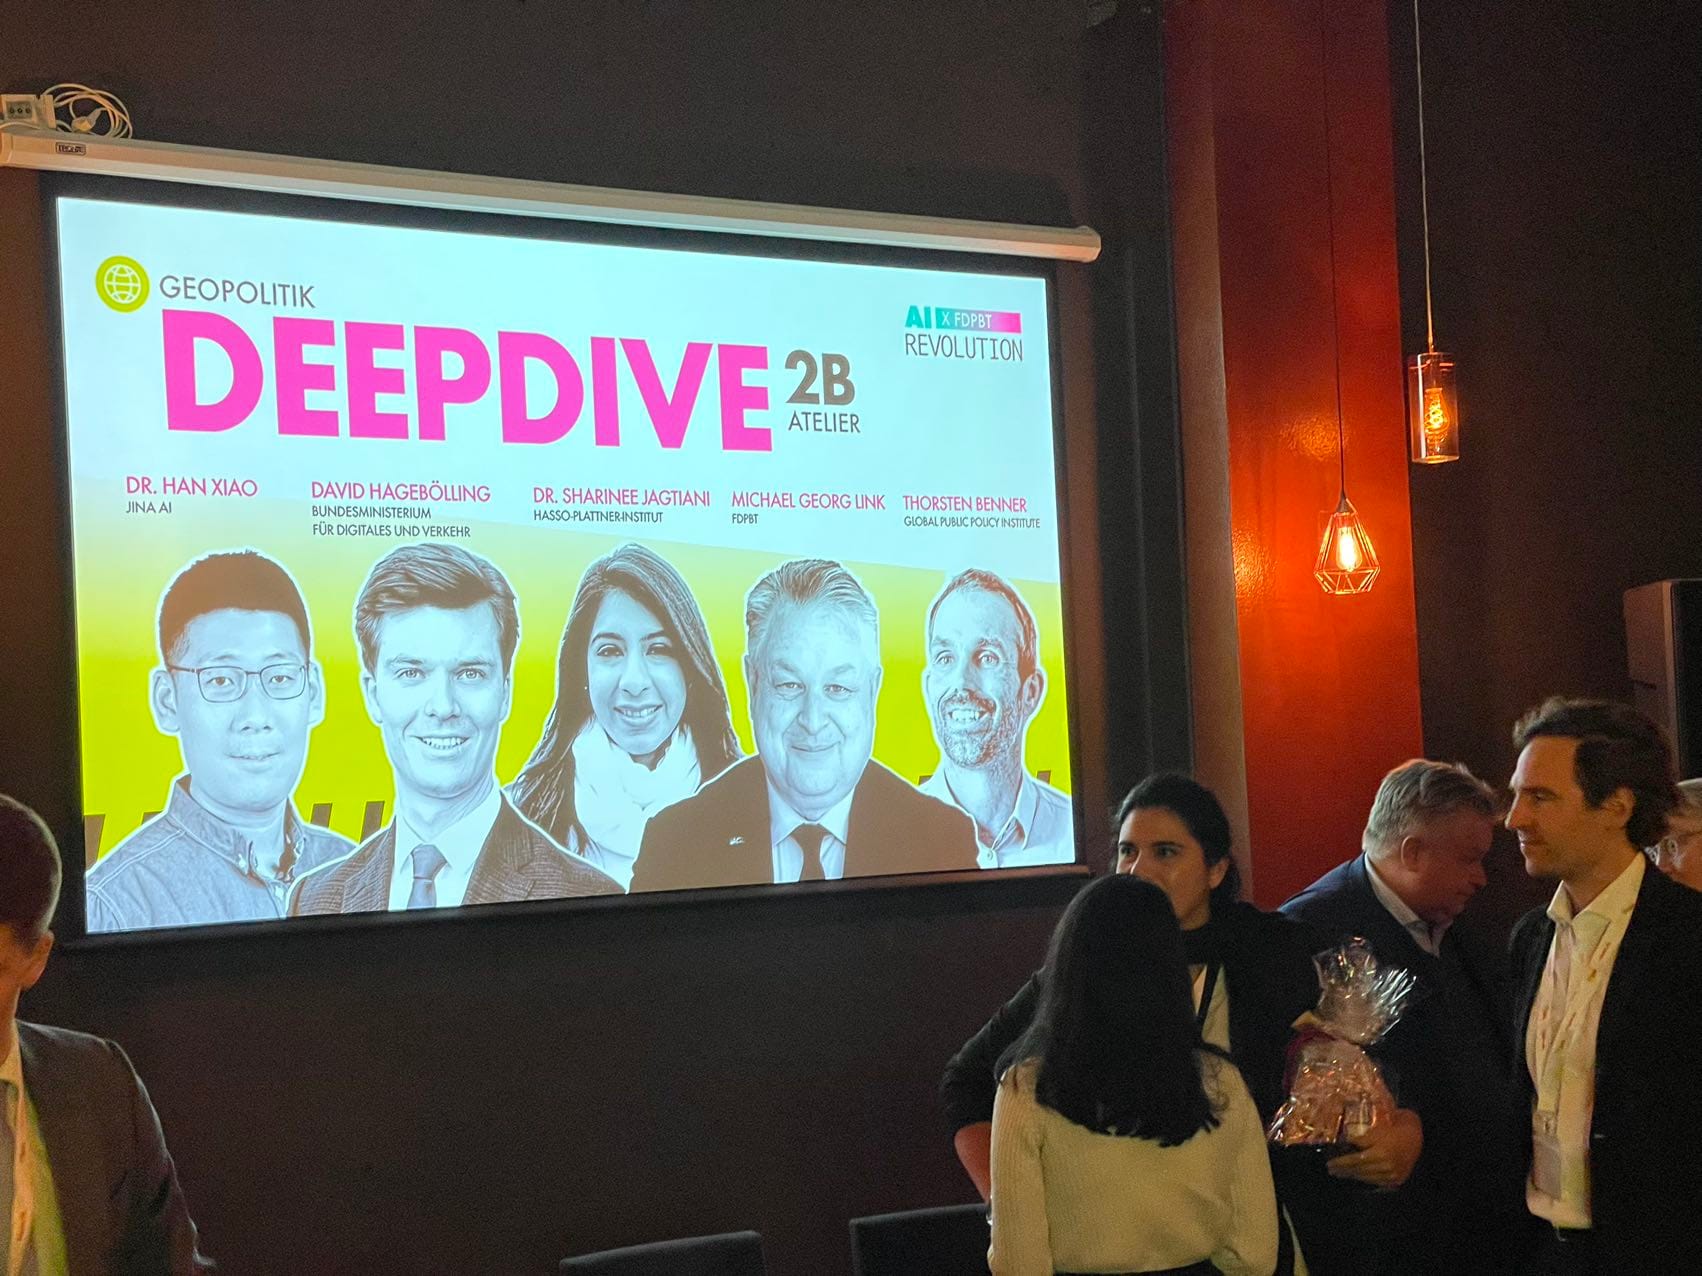 Event attendees in a room with a screen displaying "DeepDive 2B" and multiple speakers, with decor indicating a symposium on geopolitics and digital topics